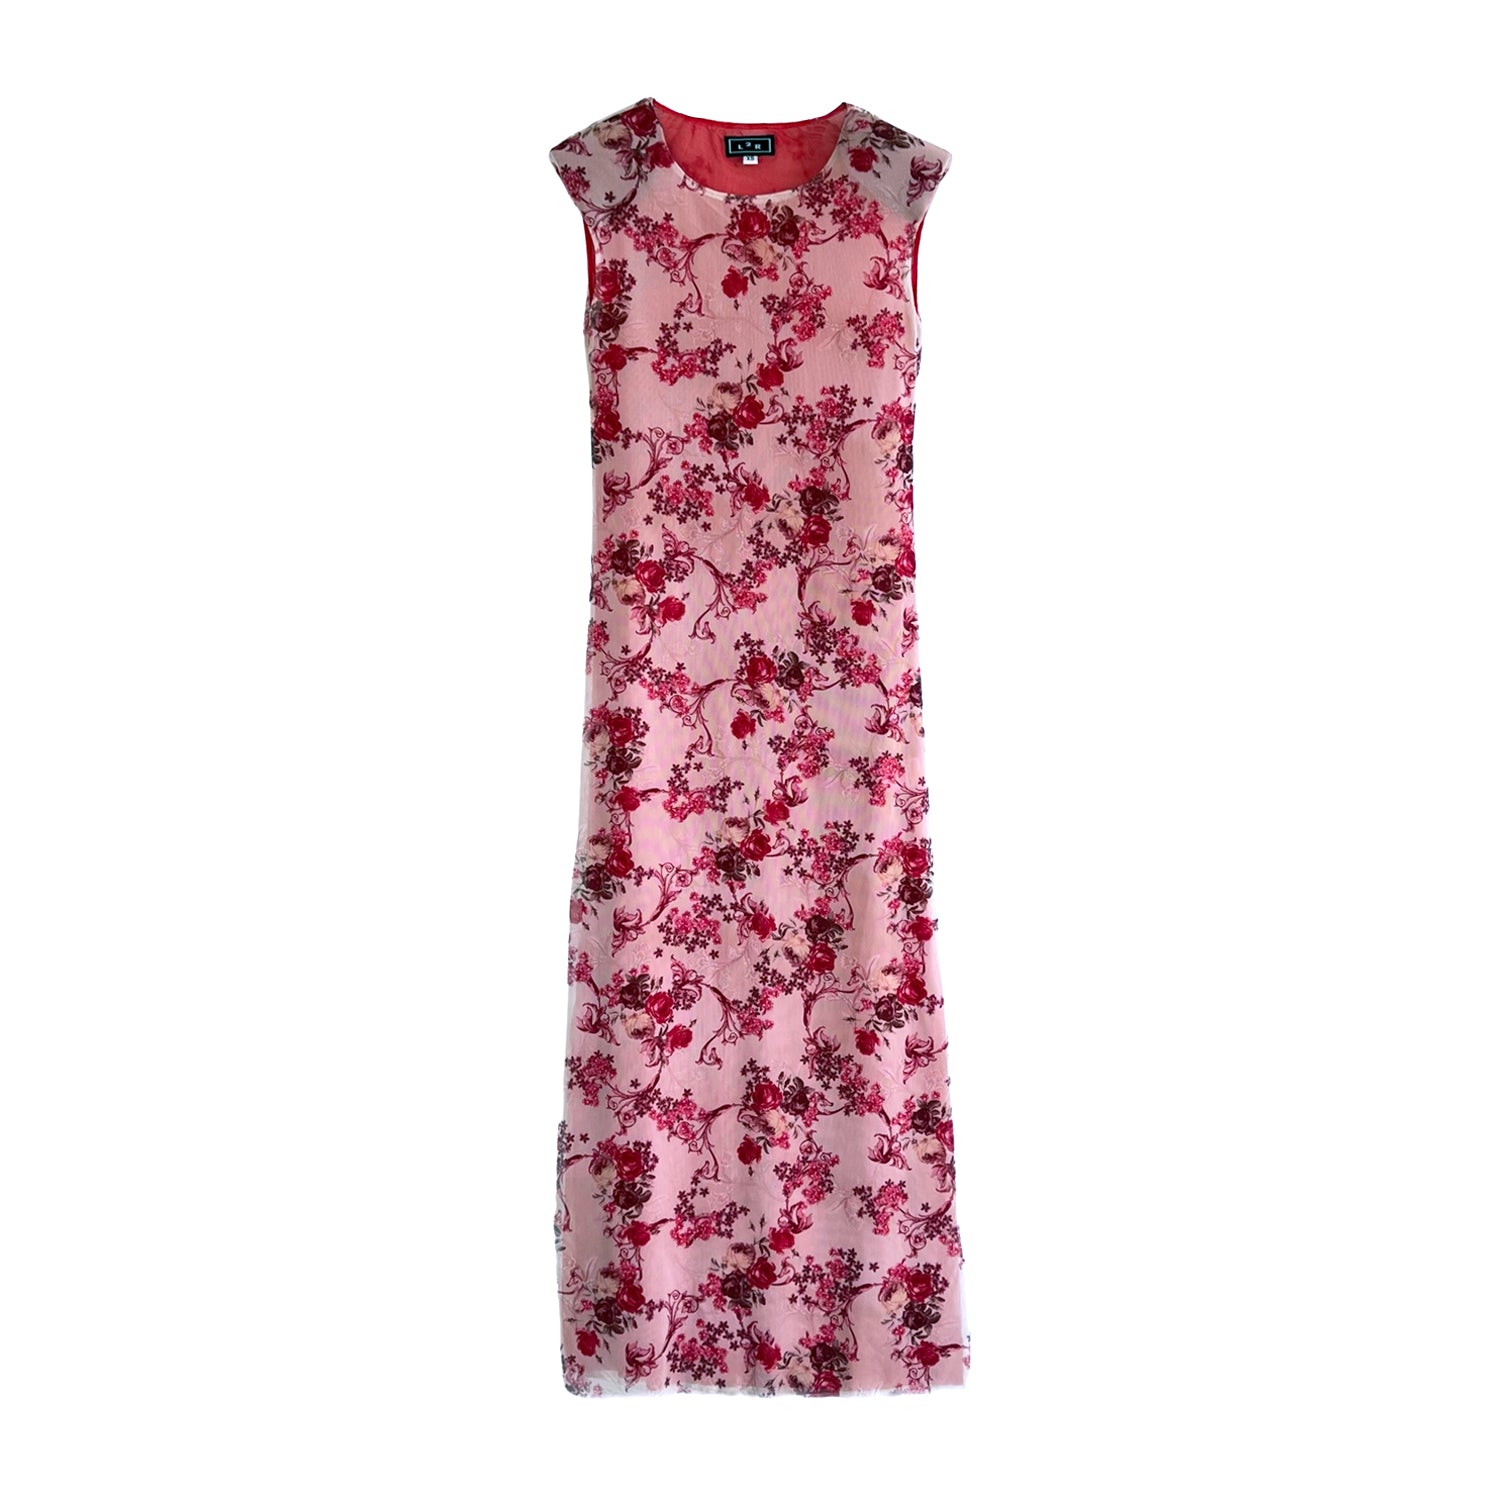 L2r The Label Women's Pink / Purple Shoulder Pad Printed Mesh Dress In Red & Pink